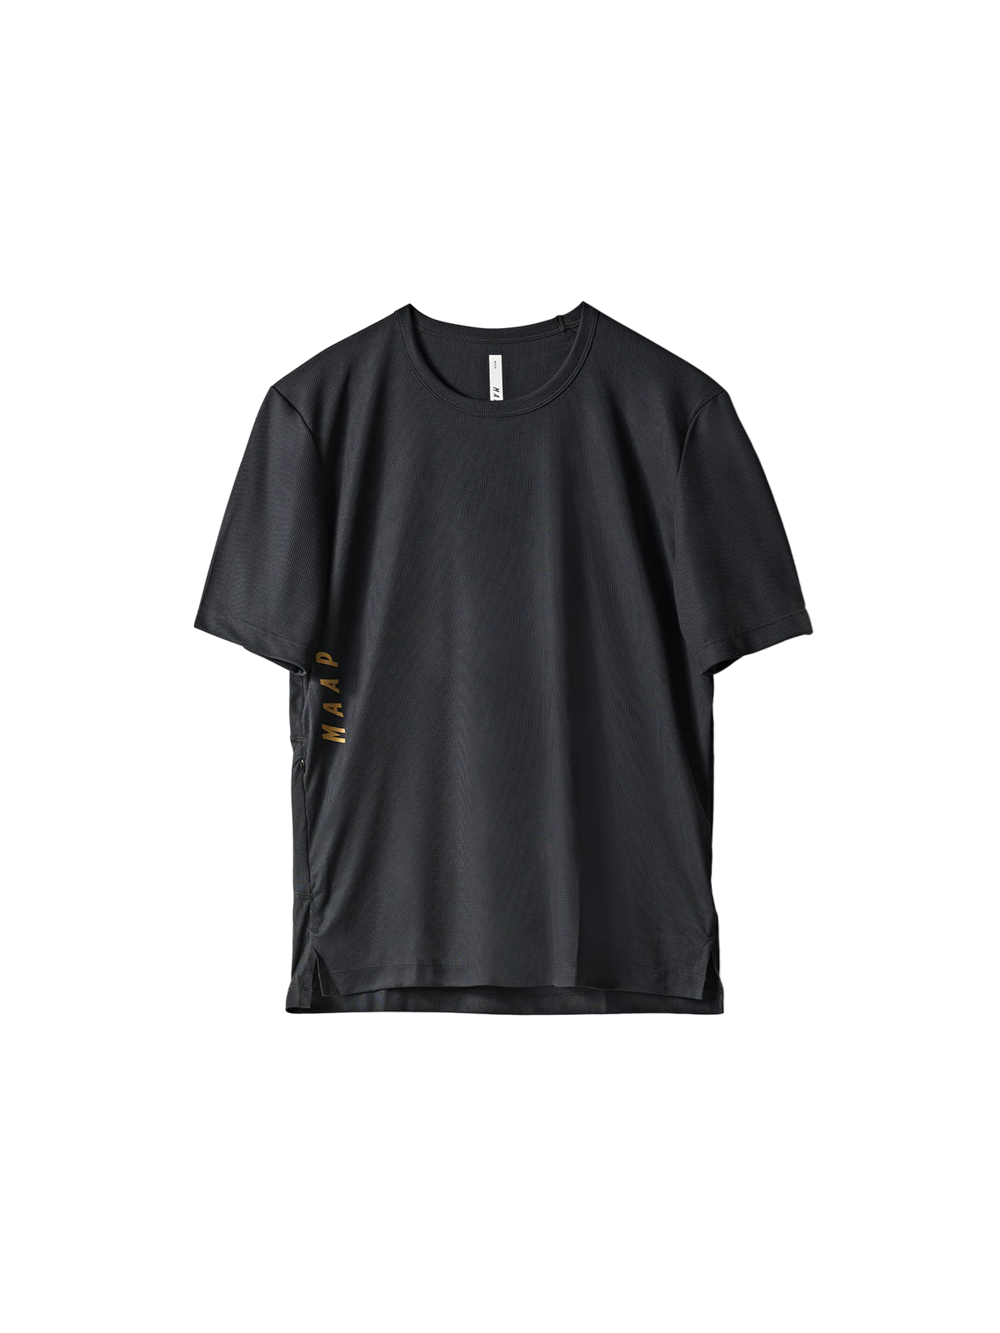 Product Image for Alt_Road Ride Tee 2.0